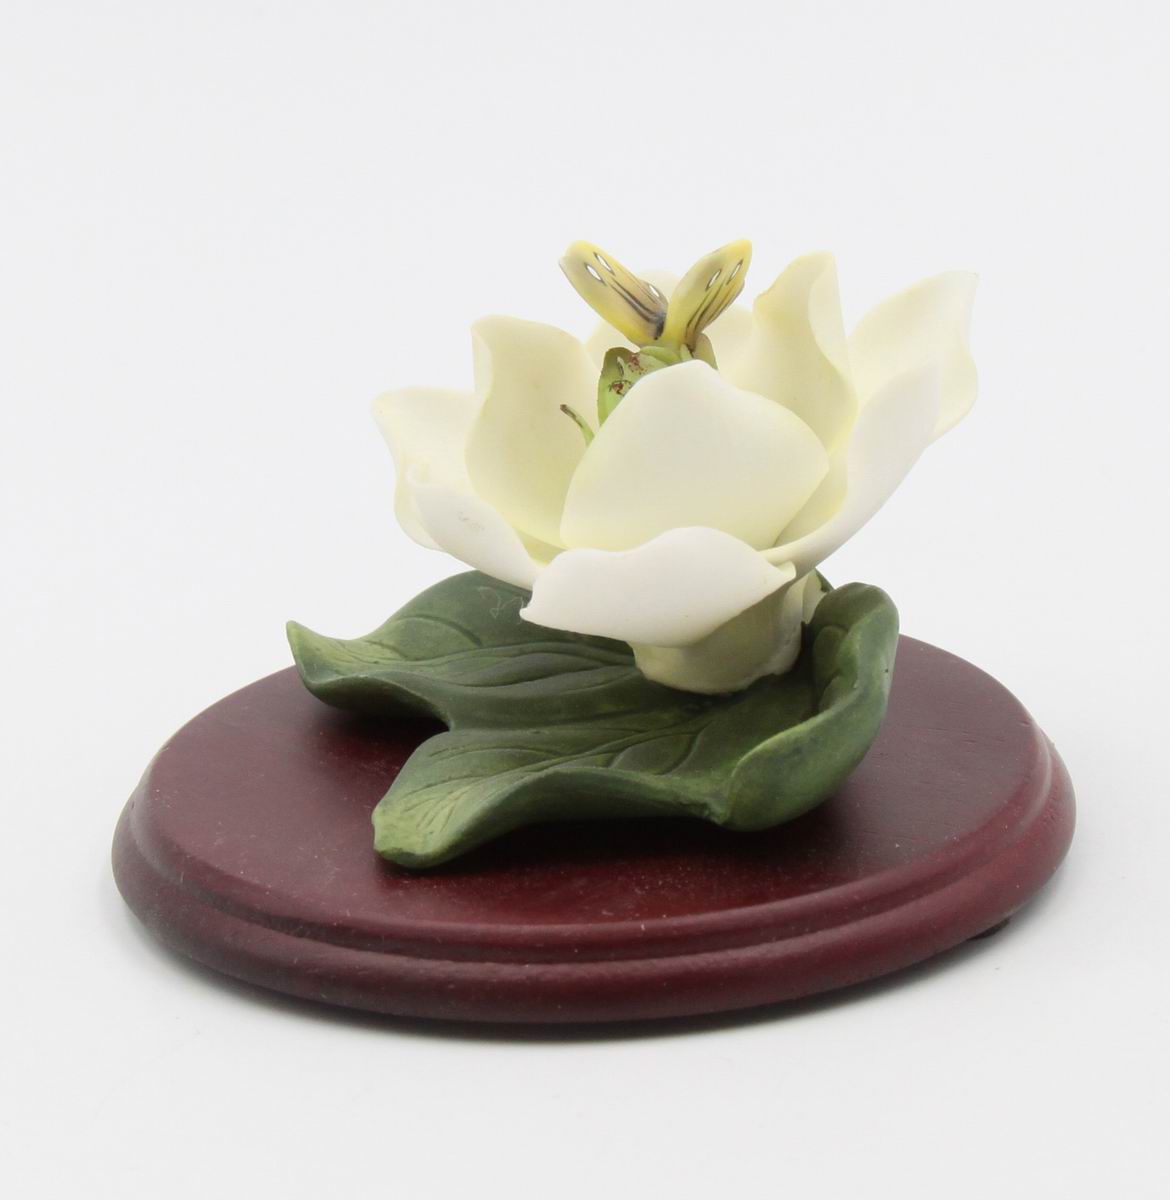 Ceramic Magnolia Flower with Butterfly on Wooden Base, Home Décor, Gift for Her, Gift for Mom